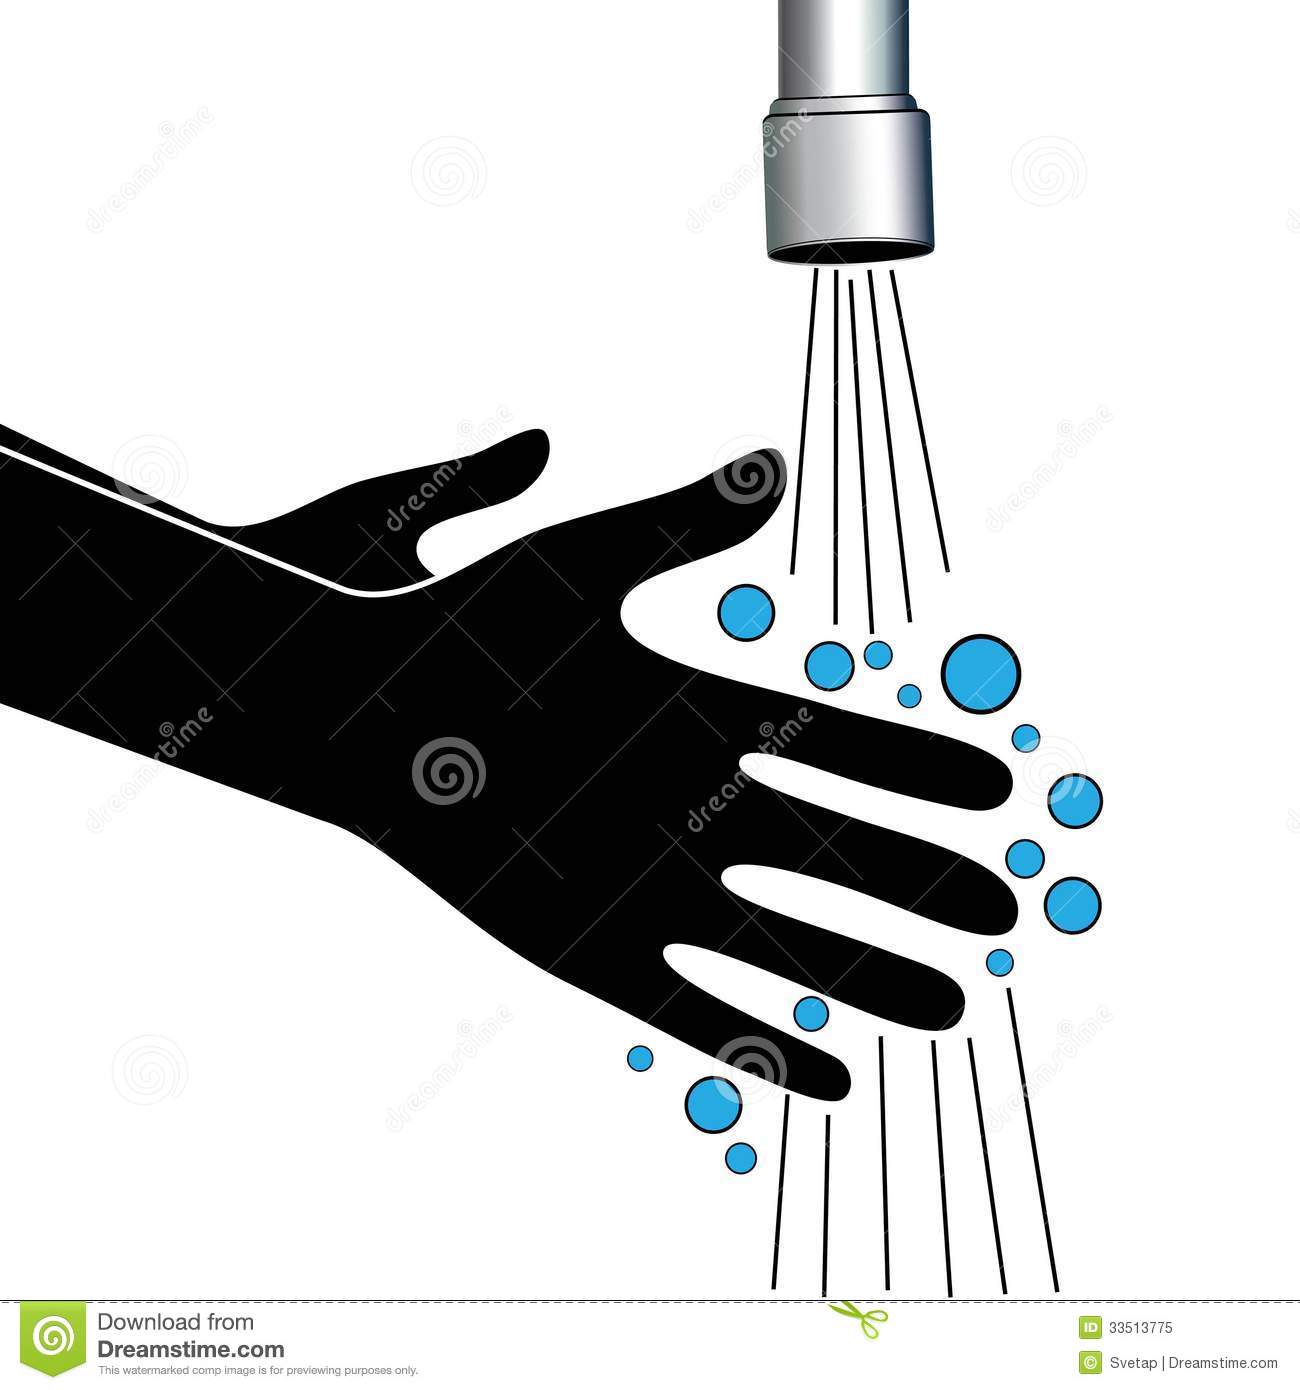 Hand Washing Under Clean Water Tap Health Care Vector Illustration